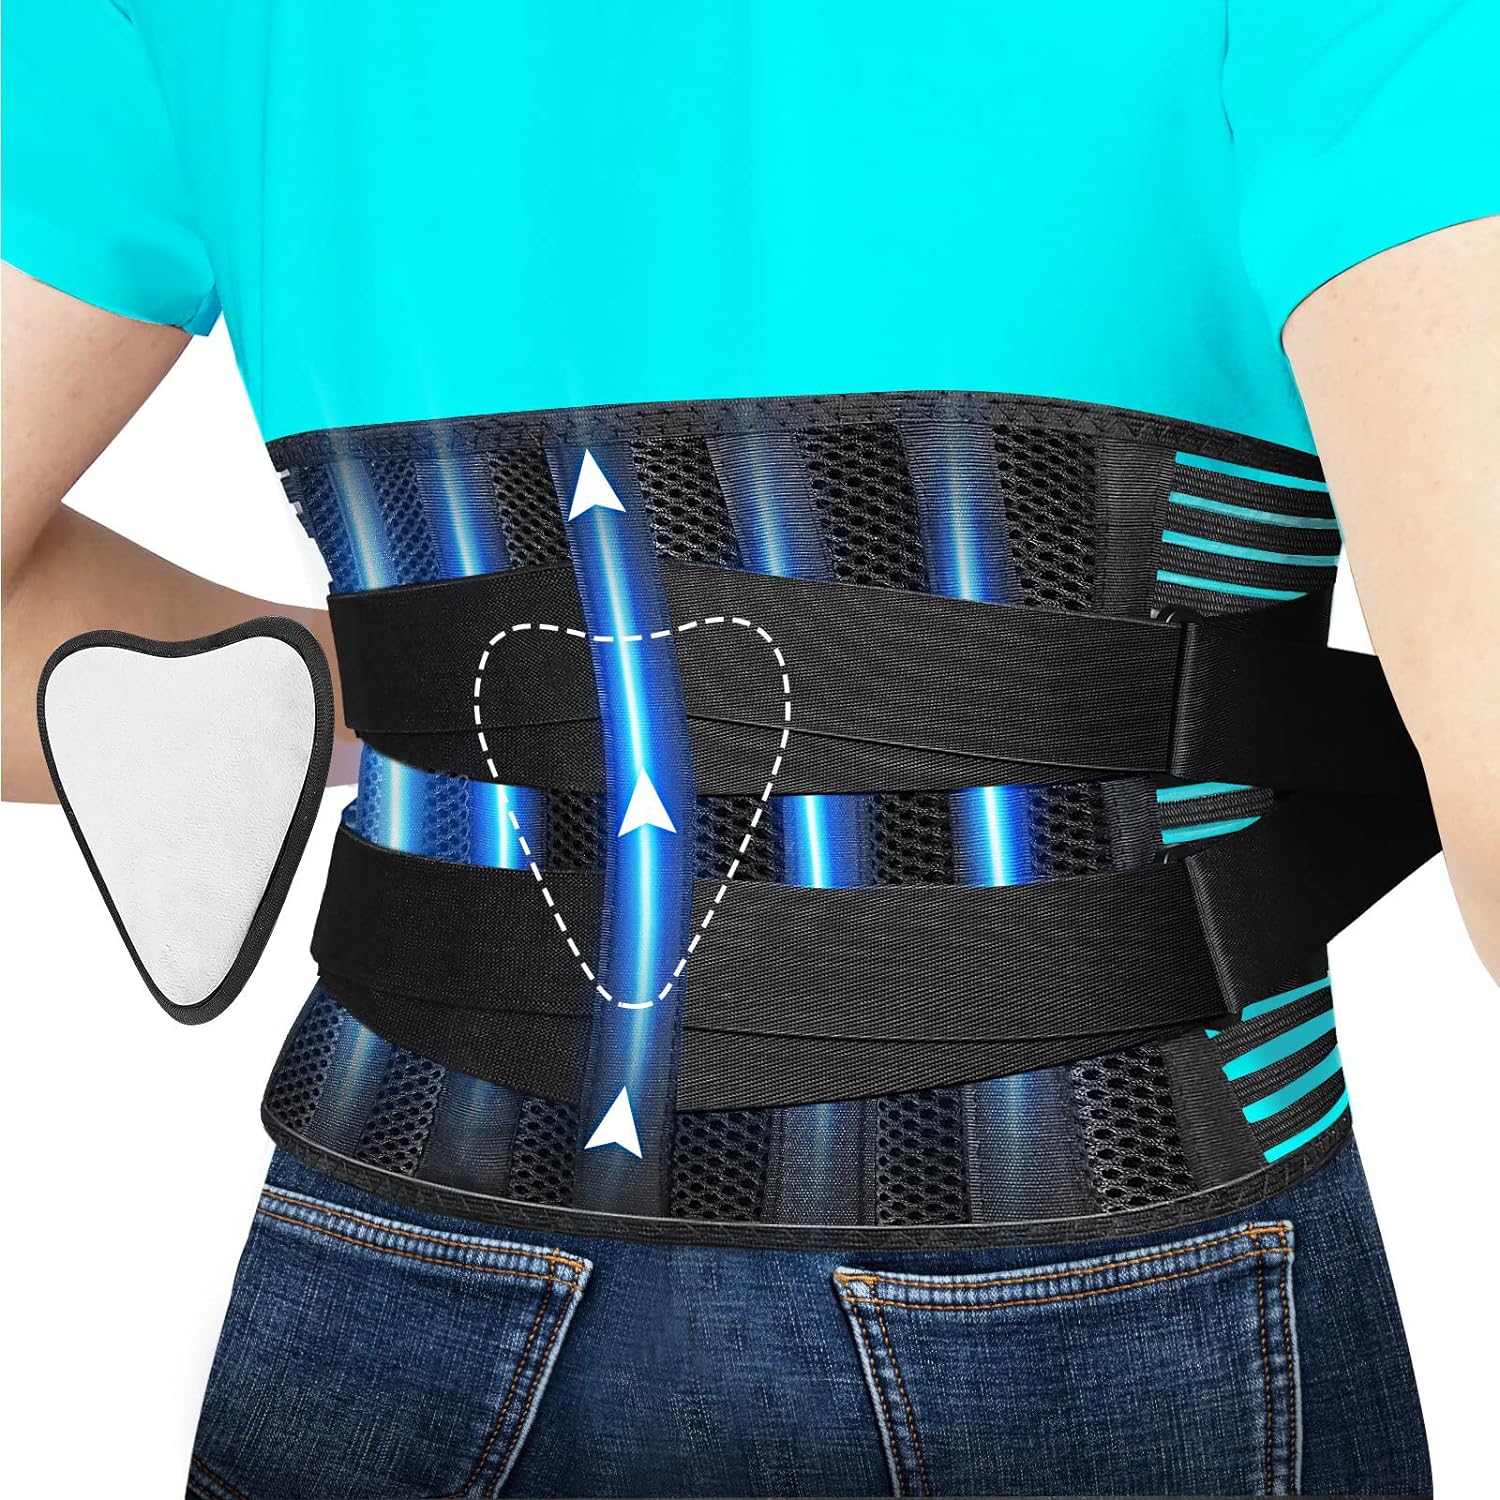 Generic 2022 Upgrade Back Brace for Men Women Lower Back Pain Relief with 7 Stays and Removable Lumbar Pad - Breathable Air Mesh Anti-s